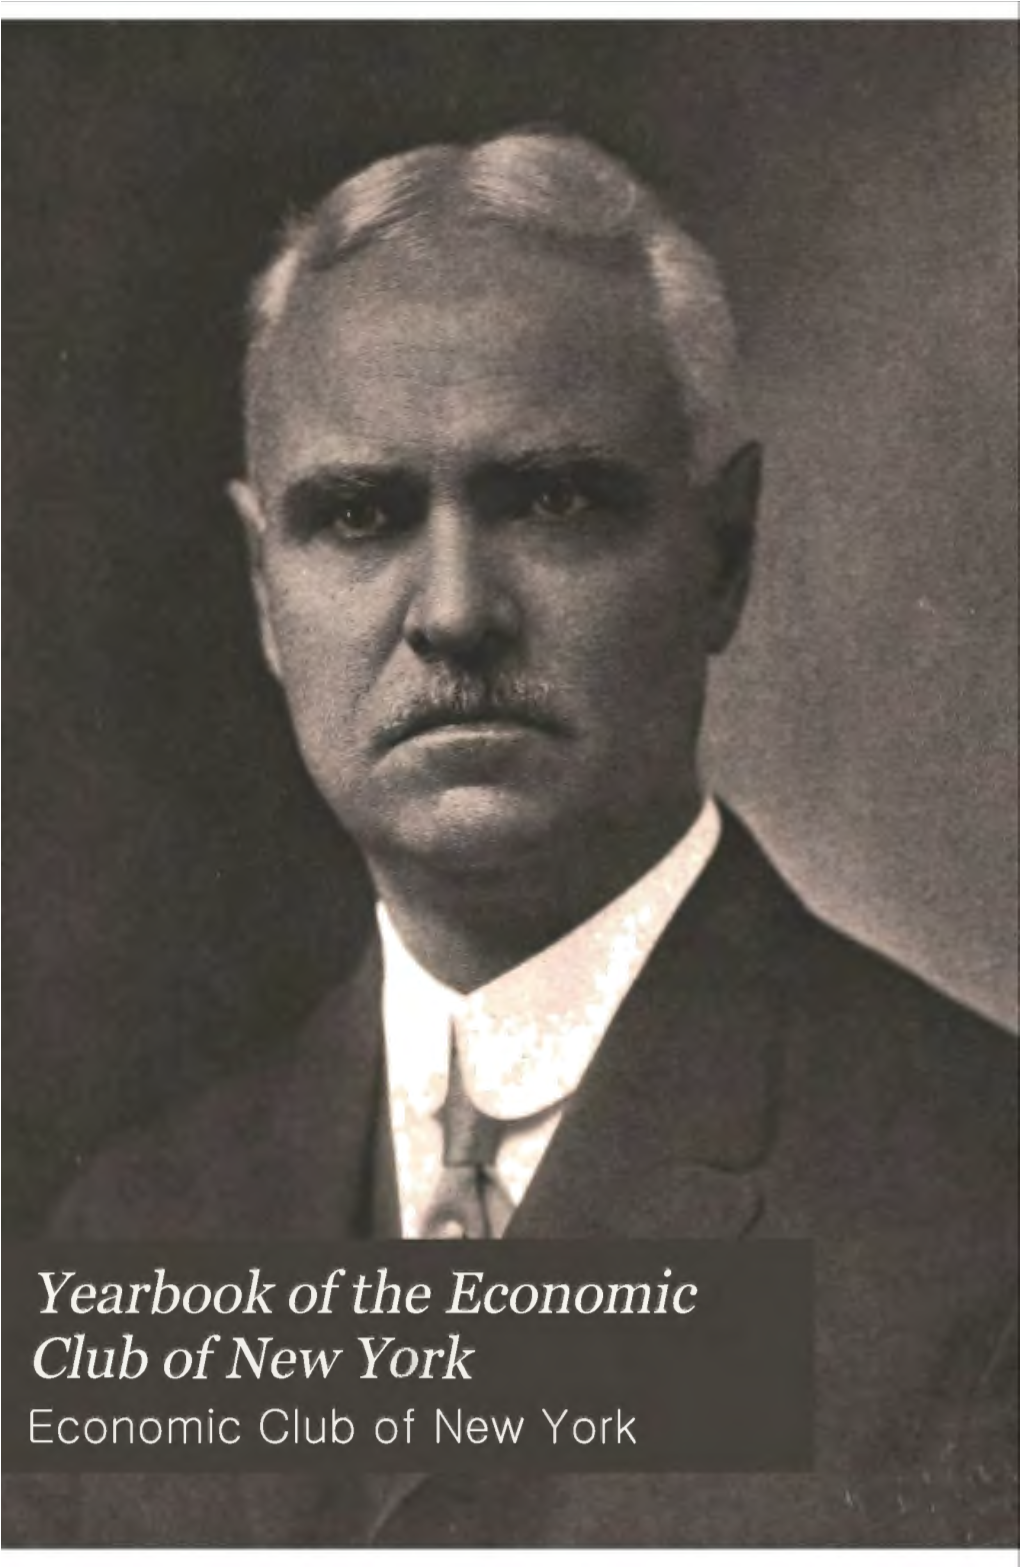 Yearbook of the Economic Club of New York Economic Club of New York GRADUATE SCHOOL of BUSINESS ADMINISTRATION HARVARD BUSINESS LIBRARY GEORGE F